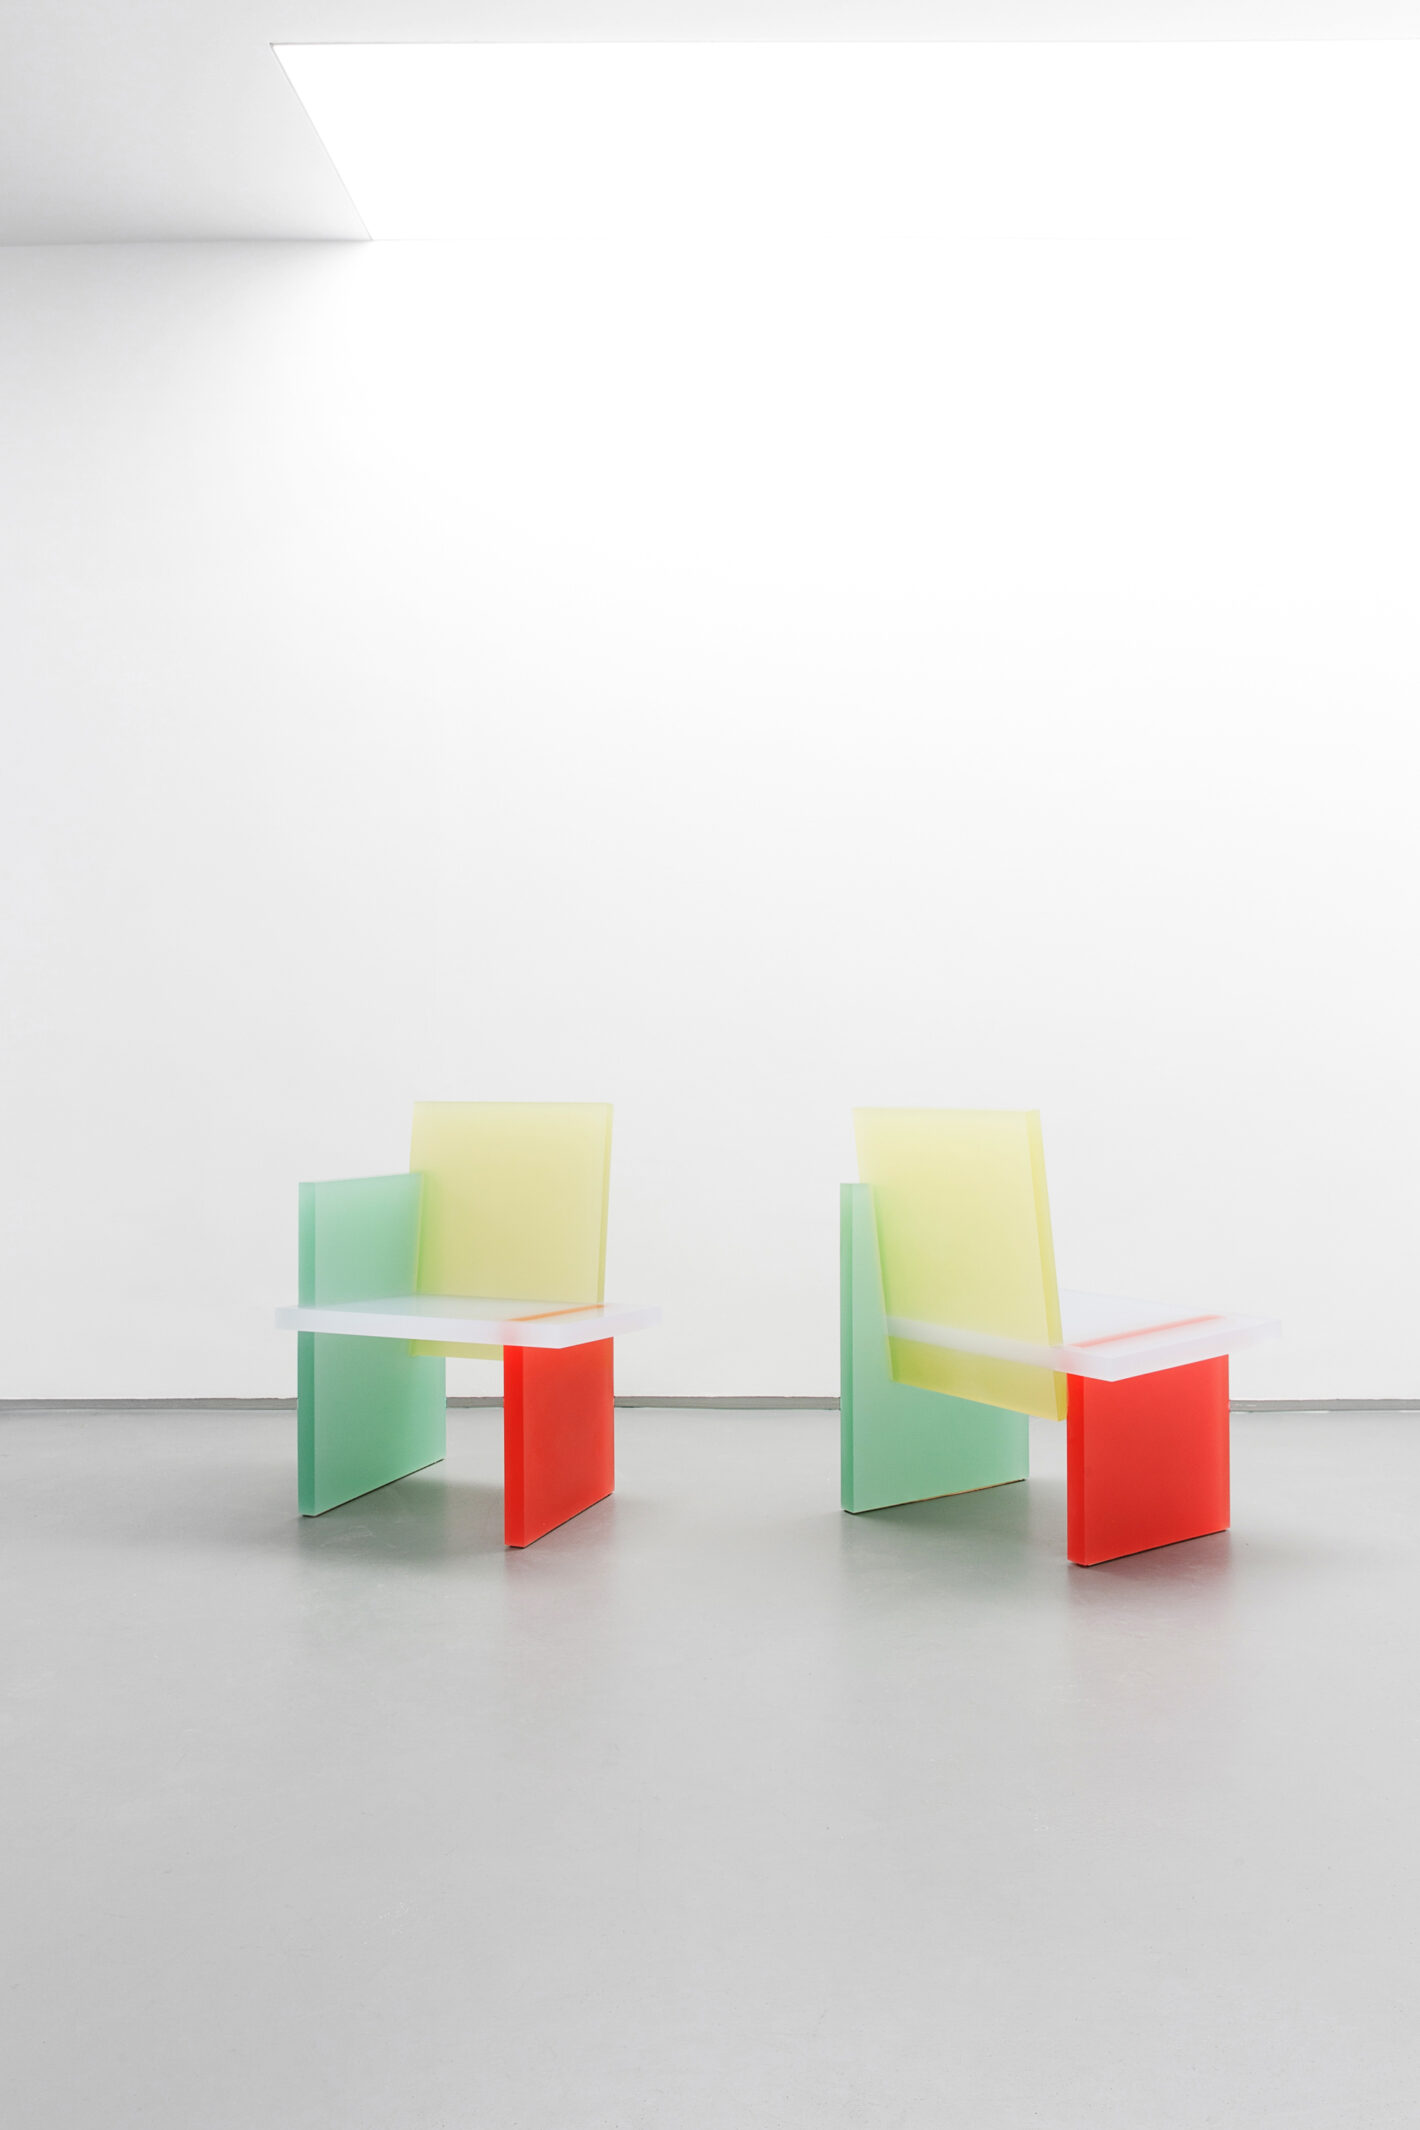 Wonmin Park Haze Armchair Red Yellow and Green pic by Adrien Millot Carpenters Workshop Gallery 2015 01